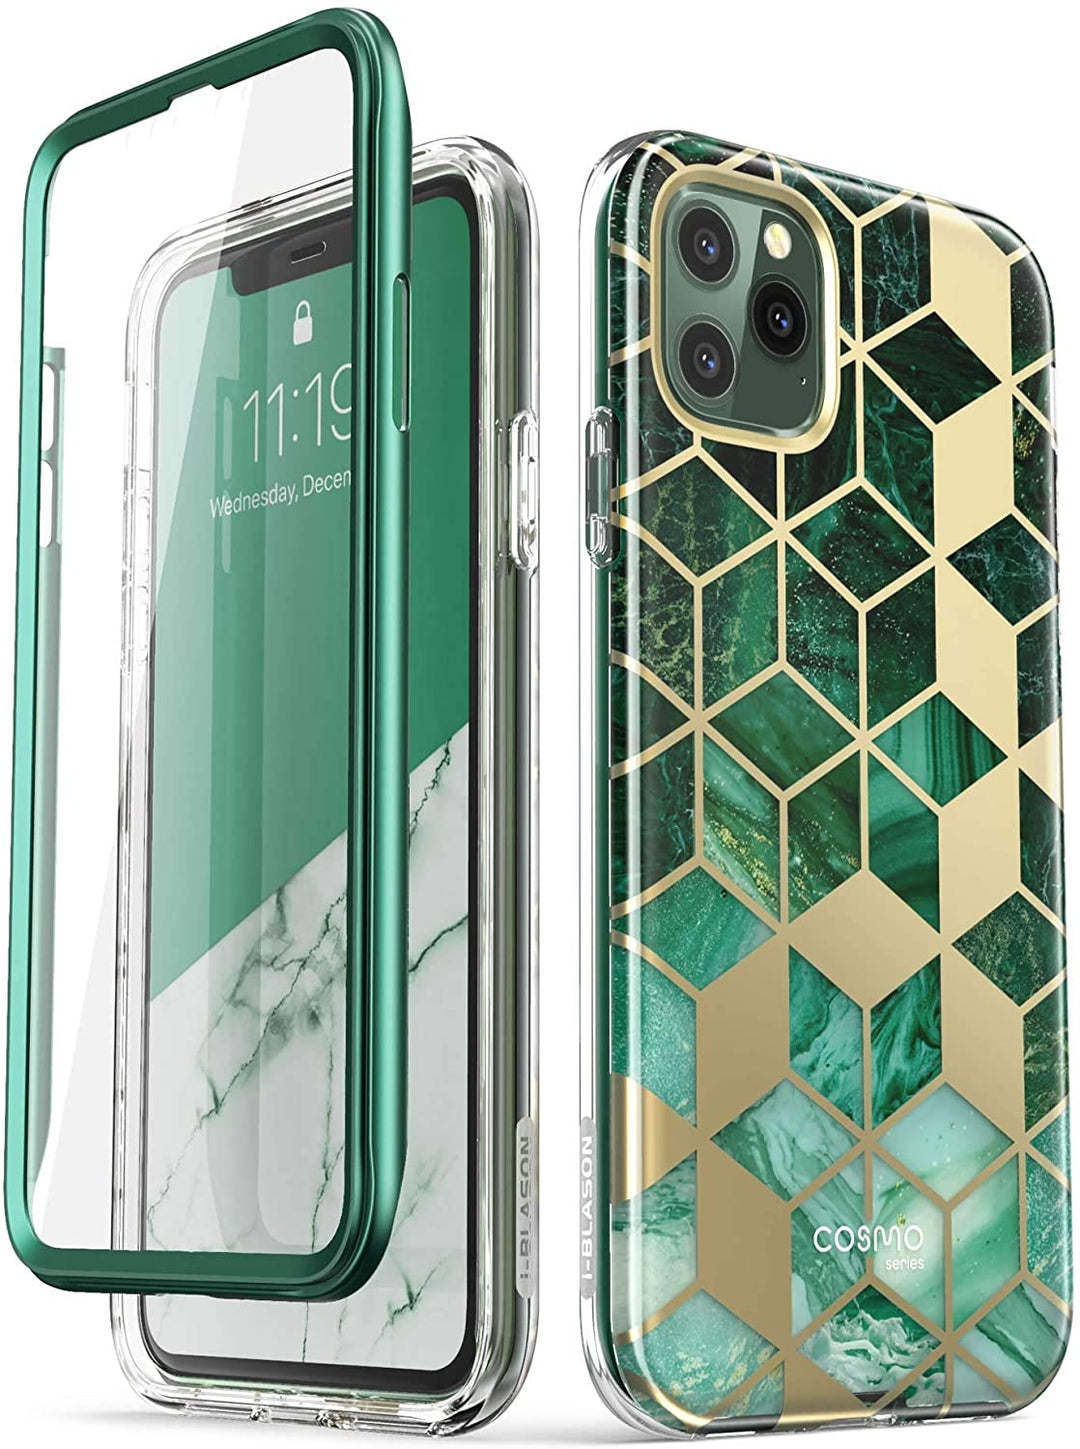 i-Blason Cosmo Series Case for iPhone 11 Pro 5.8 inch, Slim Full-Body Stylish Protective Case with Built-in Screen Protector (Green) - 3alababak